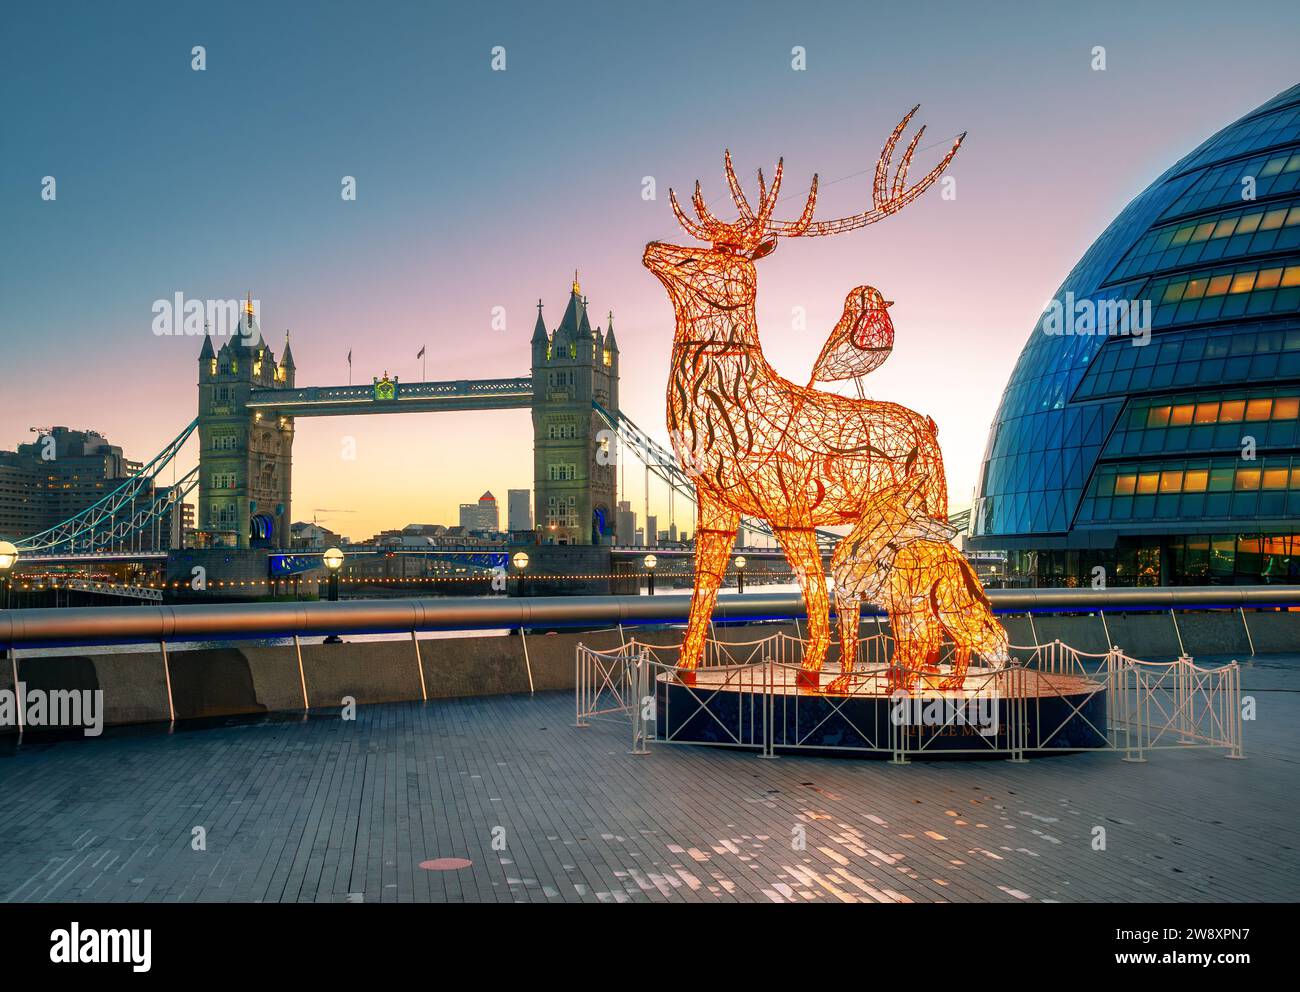 London, England, UK - December 17, 2021: The evening scene with bright Christmas decorations specific to London in the foreground; the deer, the fox a Stock Photo